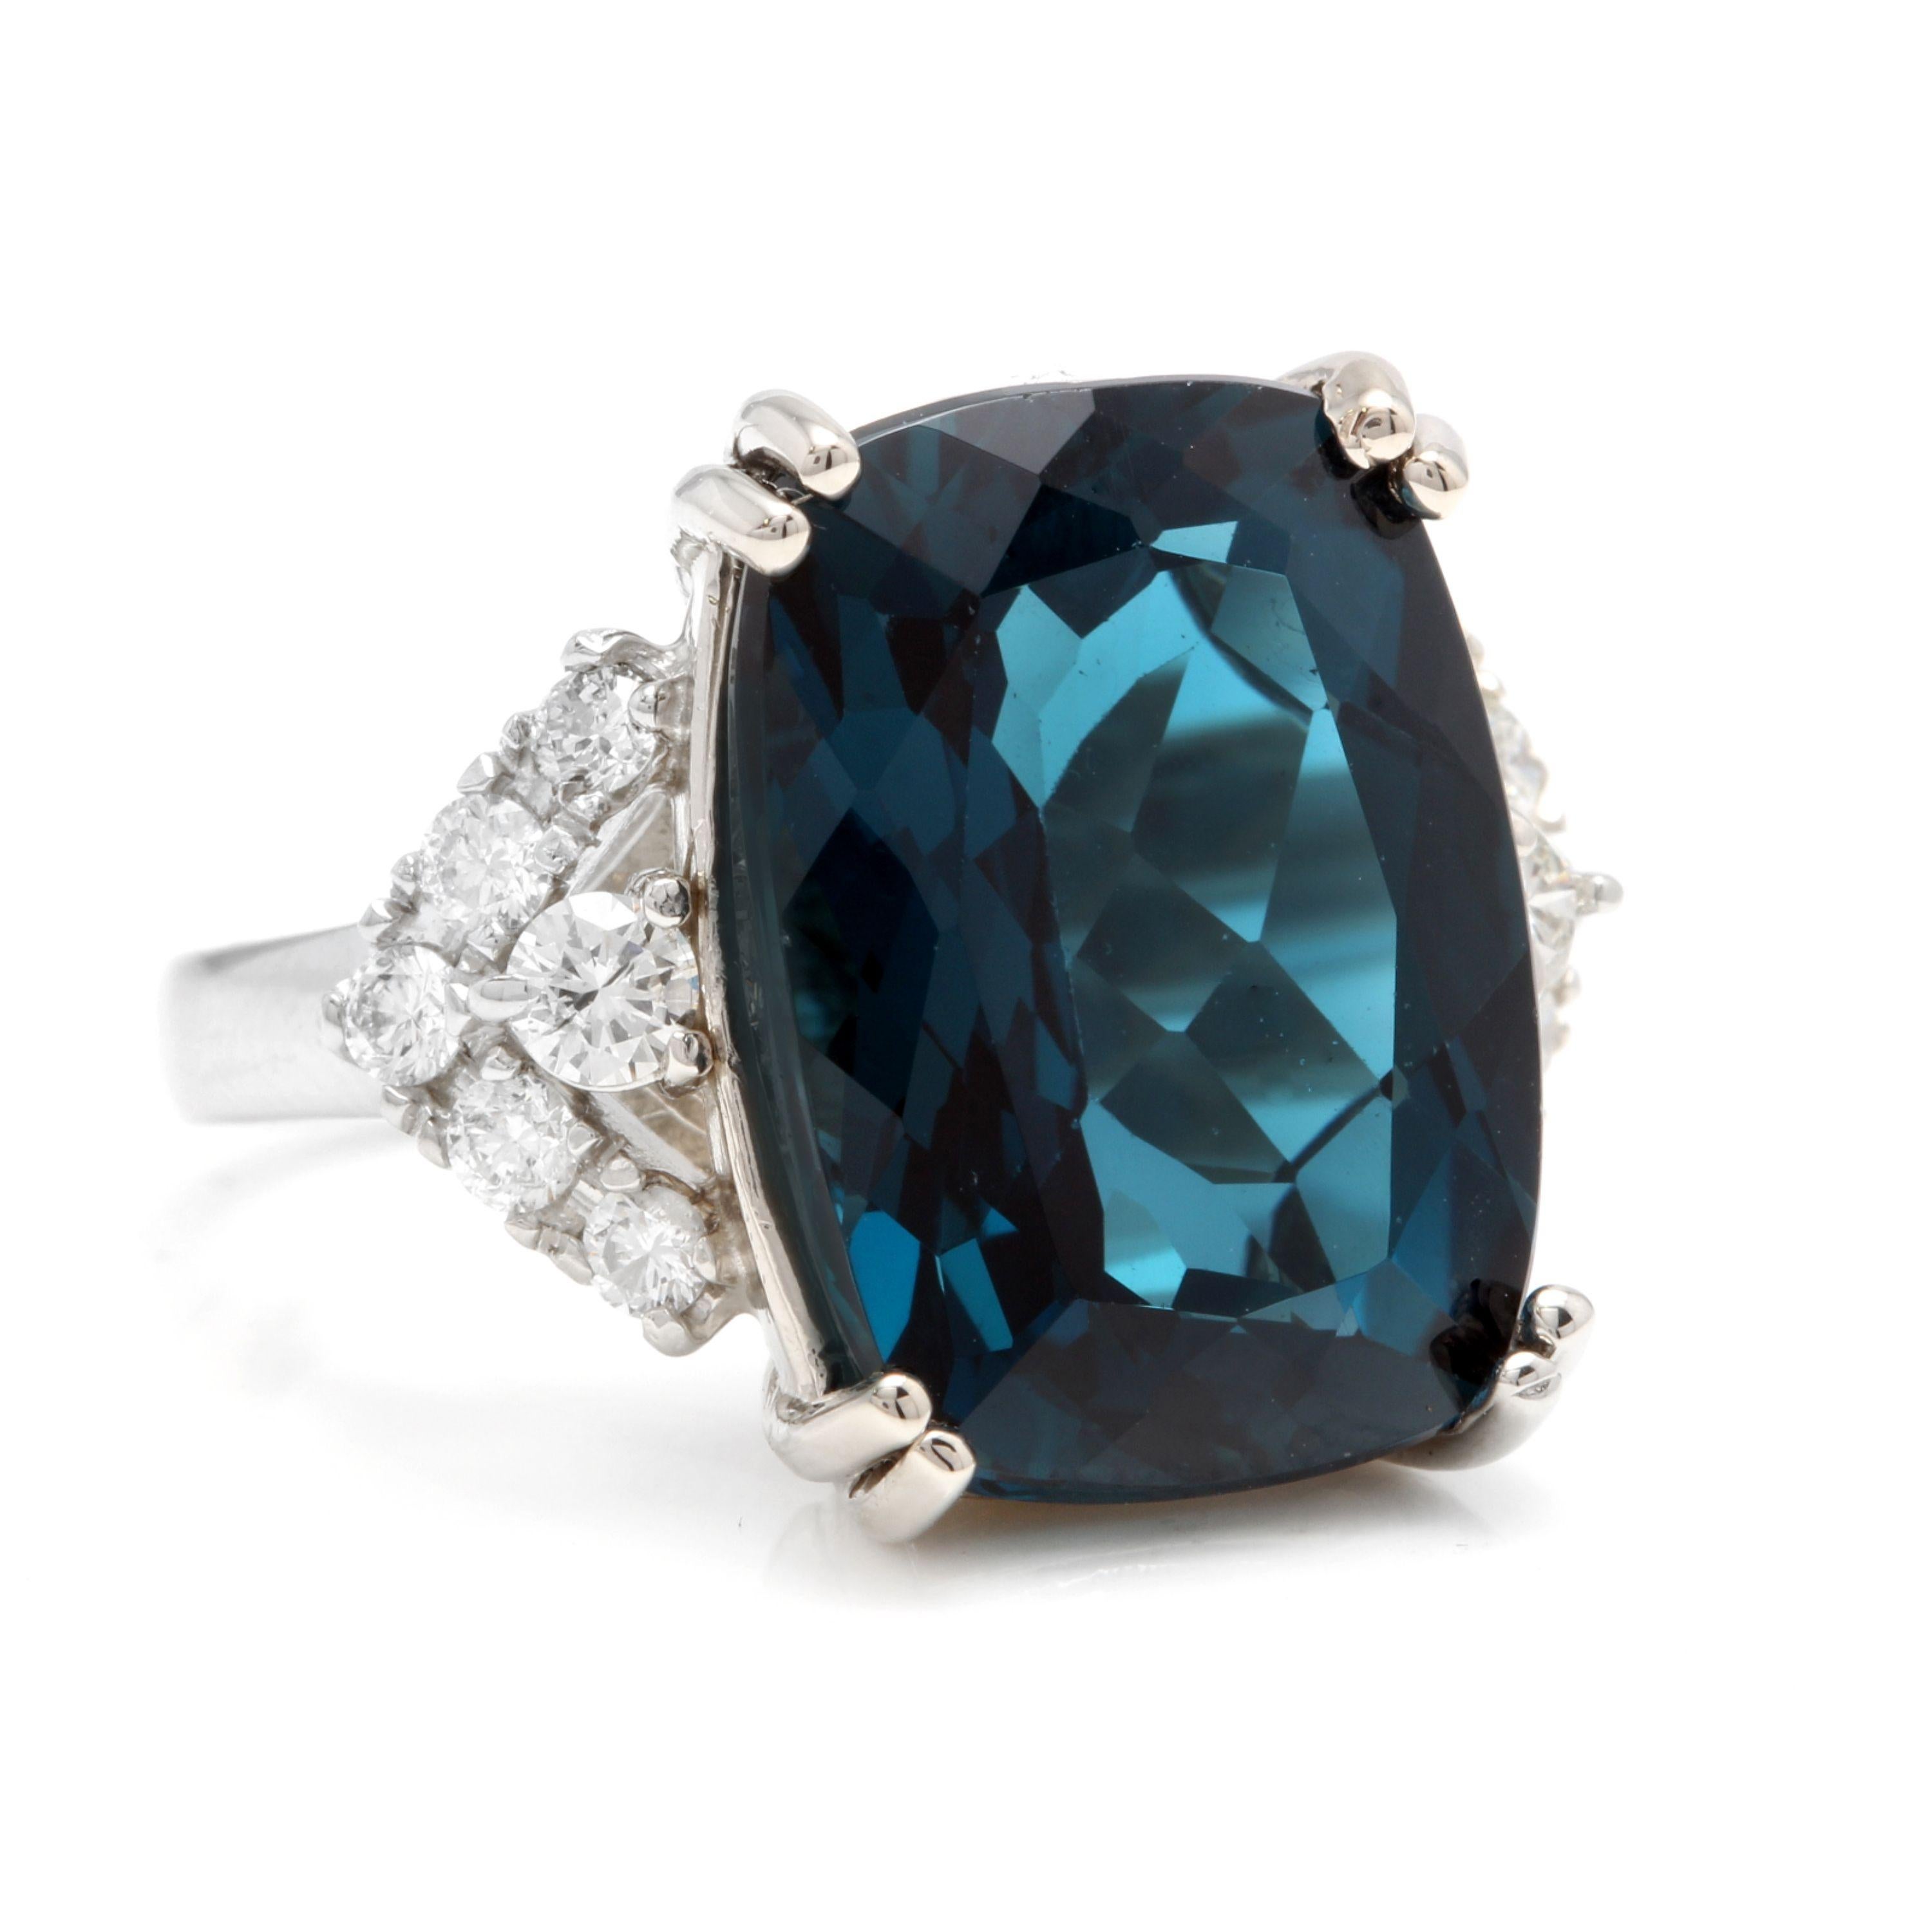 13.70 Carats Natural Impressive London Blue Topaz and Diamond 14K White Gold Ring

Total Natural London Blue Topaz Weight: Approx. 13.00 Carats

London Blue Topaz Measures: Approx. 16 x 12mm

Natural Round Diamonds Weight: Approx. 0.70 Carats (color